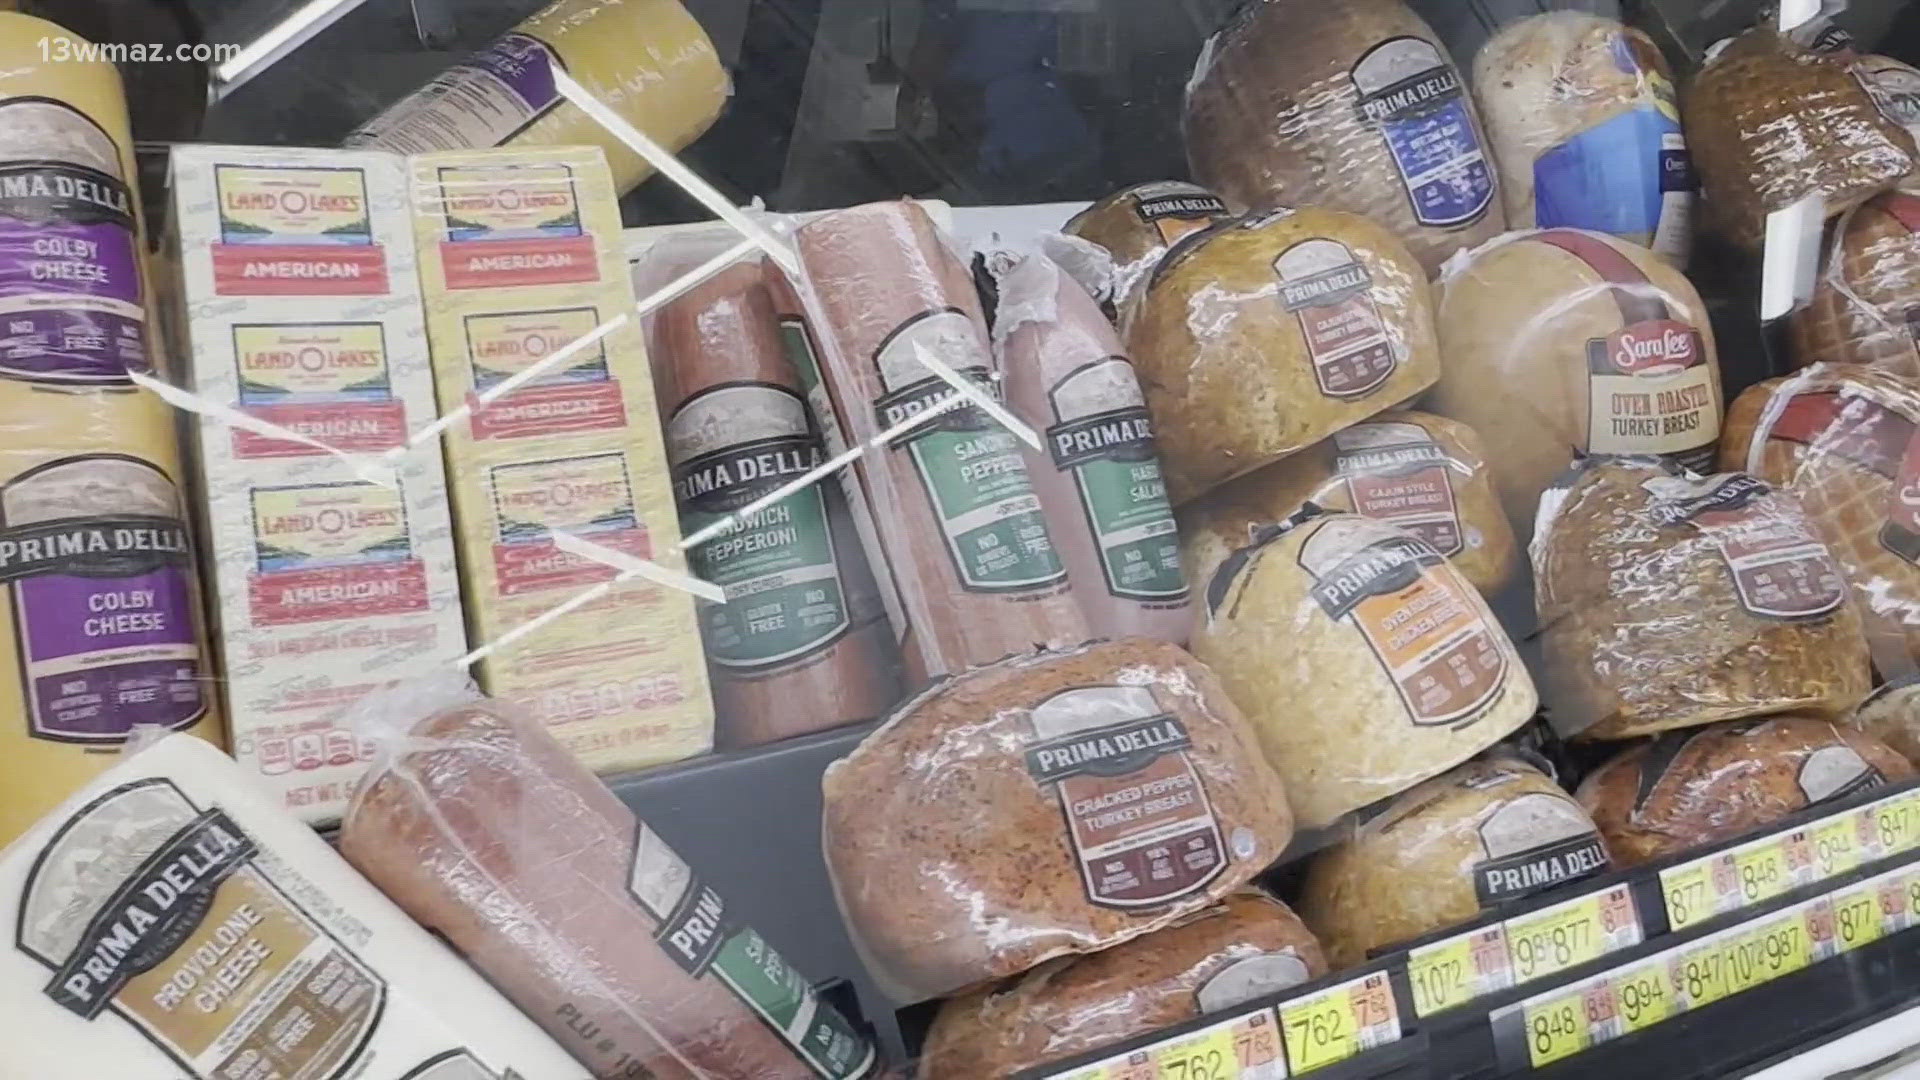 The recalls are tied to an ongoing outbreak of listeria poisoning that has killed two people and sickened nearly three dozen in 13 states, according to the CDC.